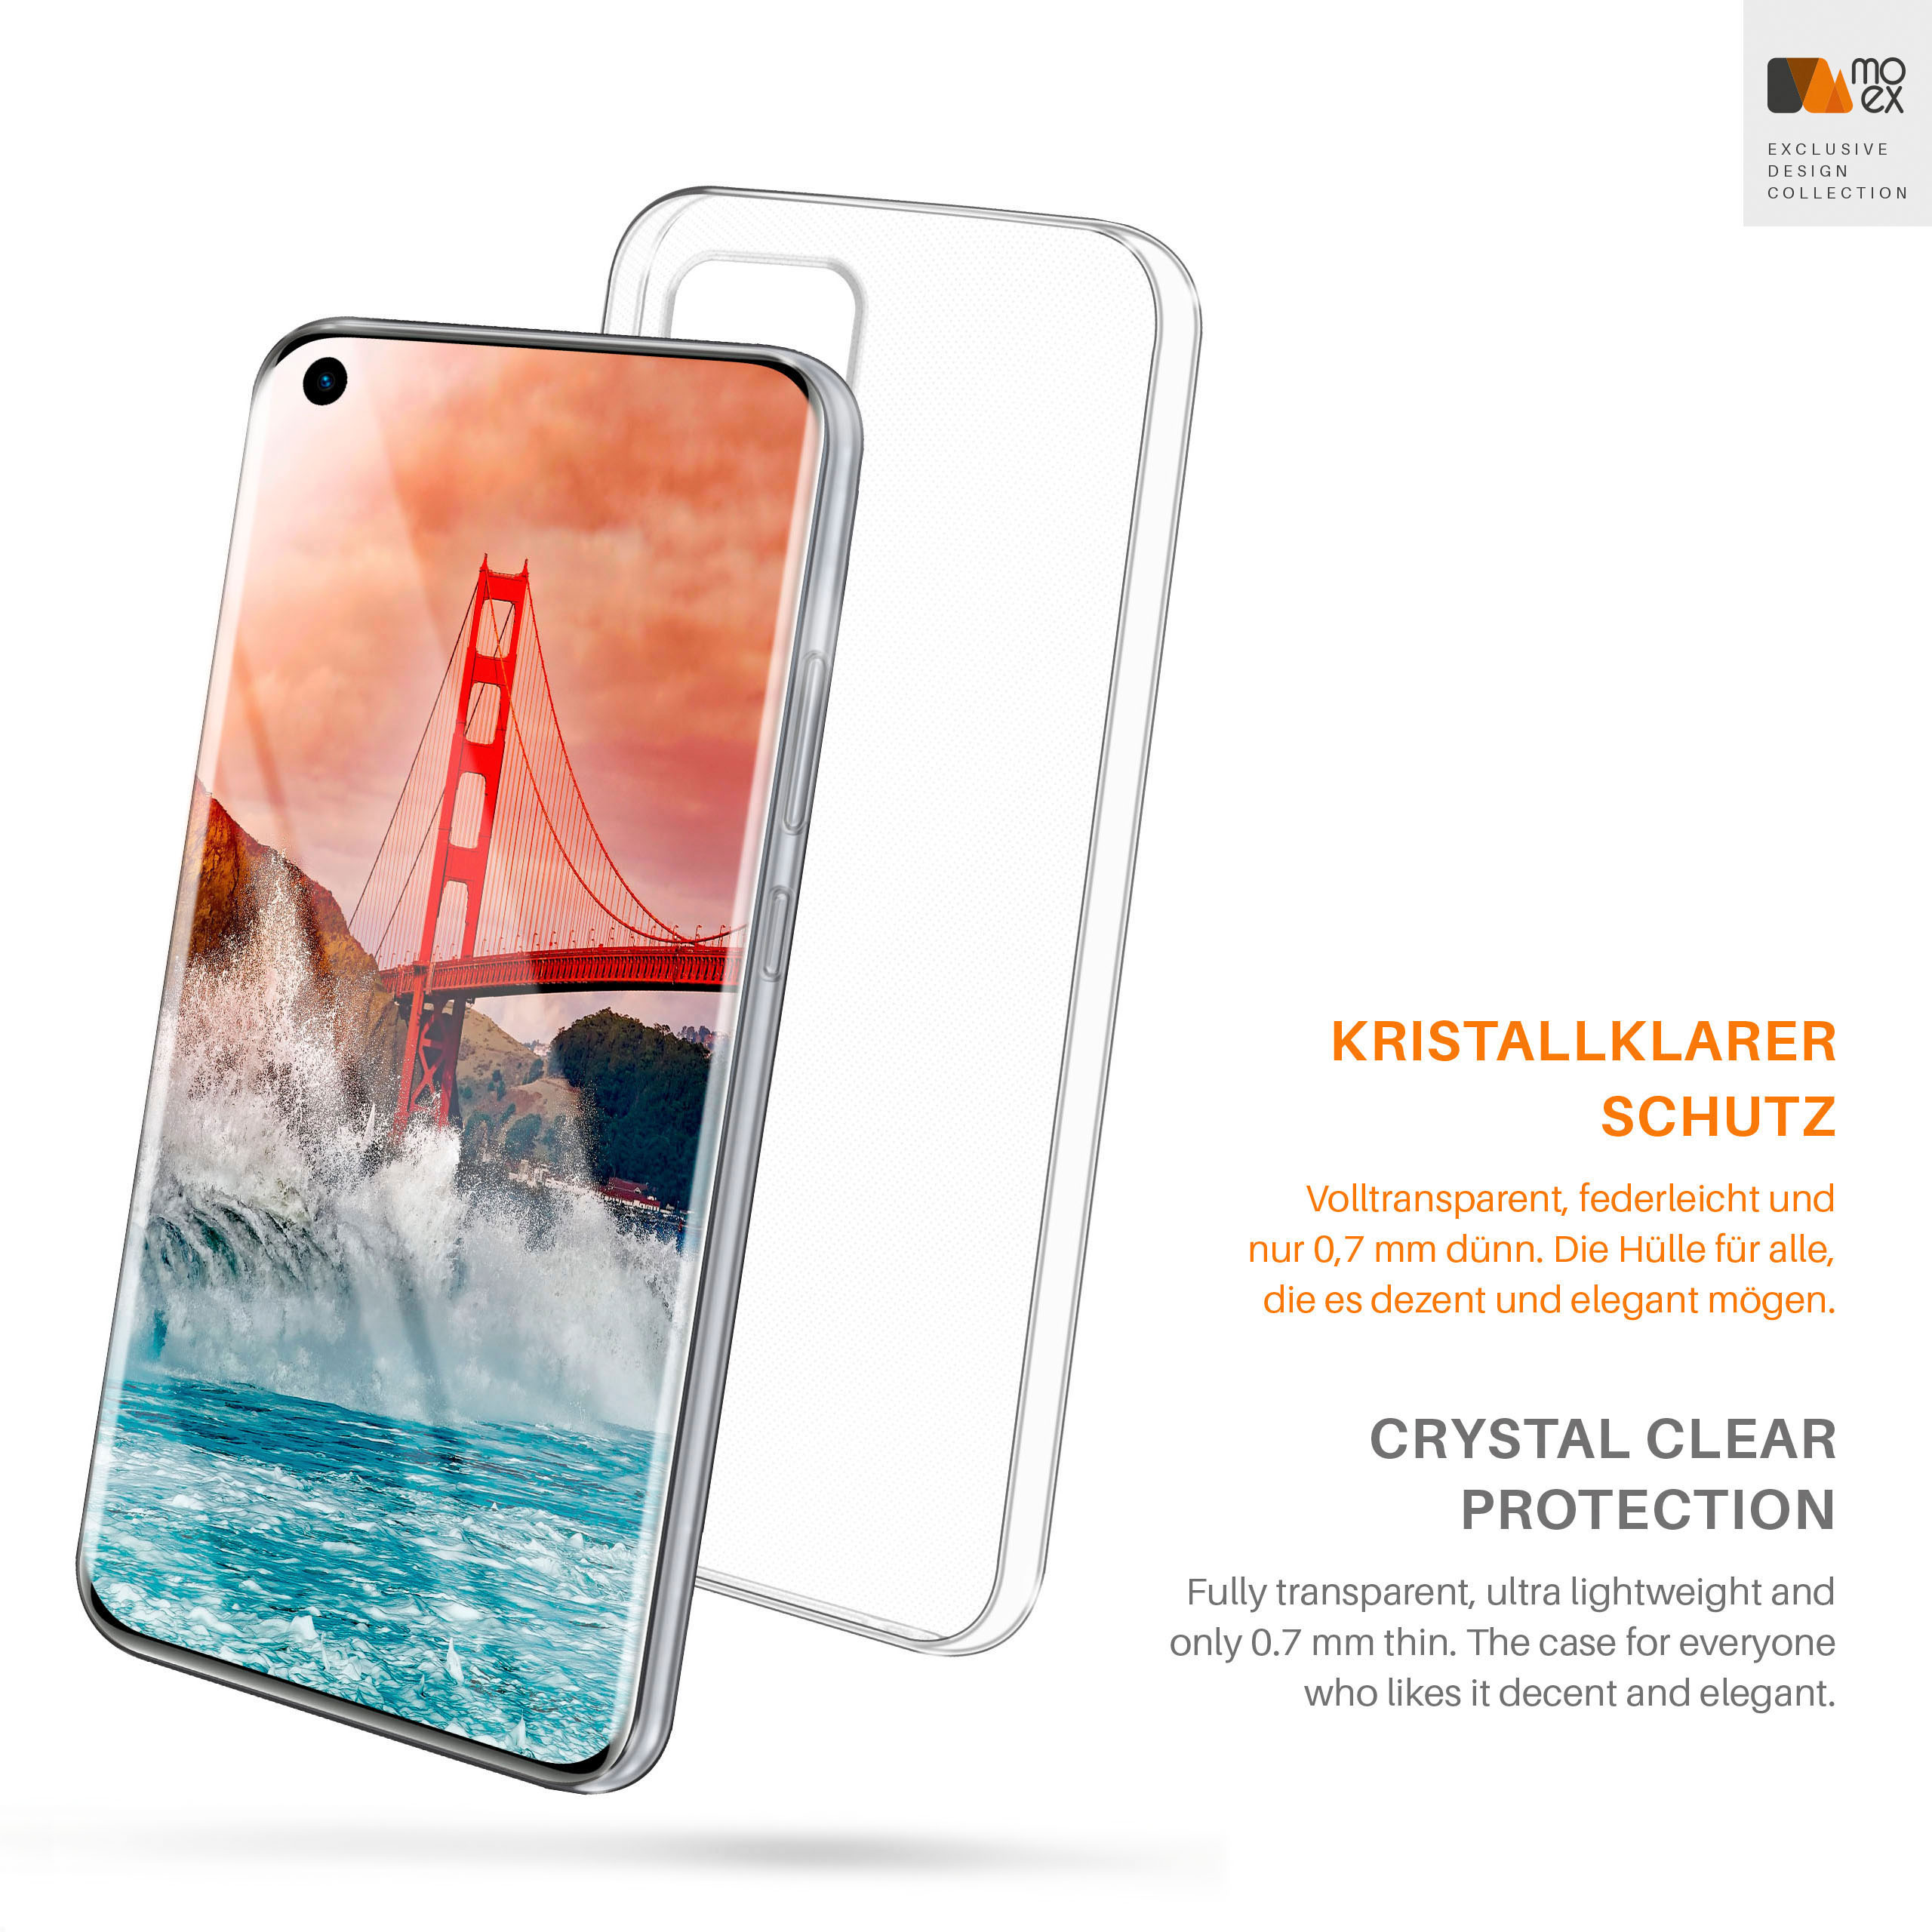 MOEX Aero Case, Backcover, Crystal-Clear Honor, 30